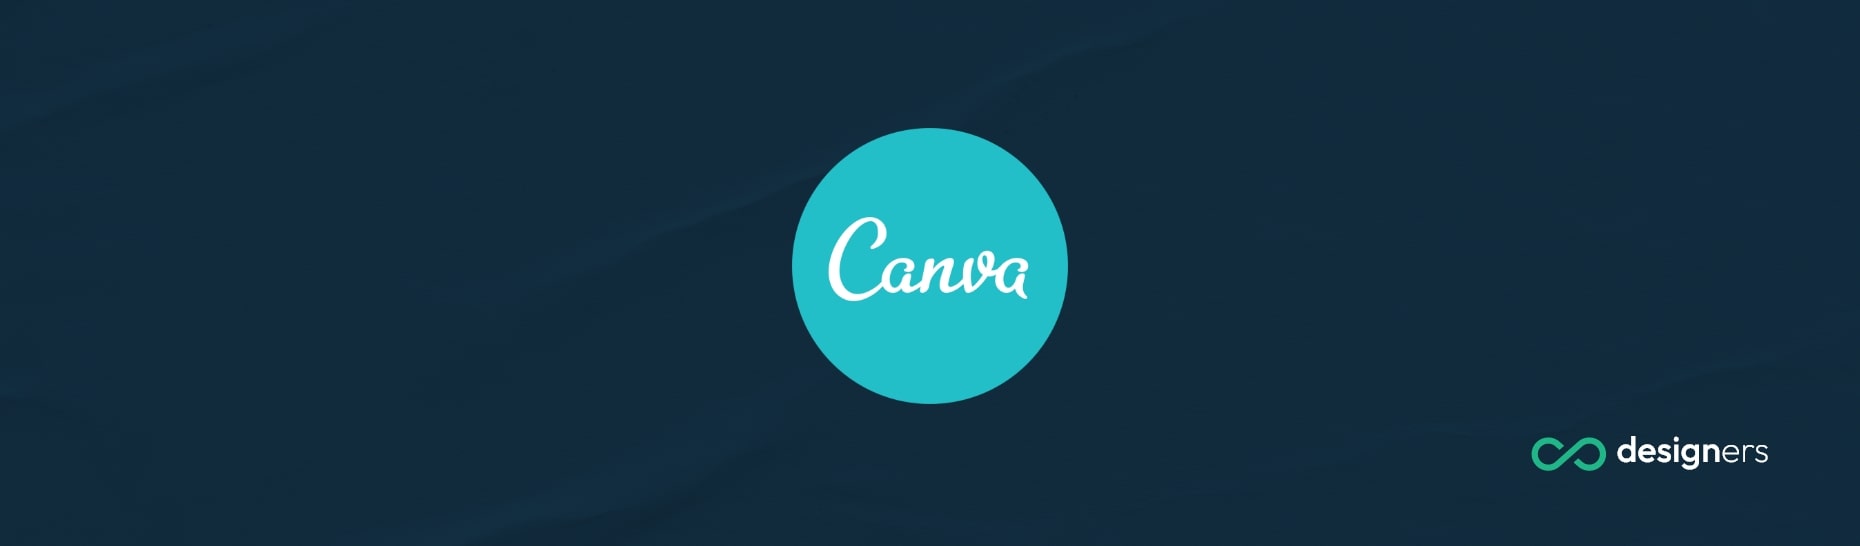 Does Canva Work With WordPress?